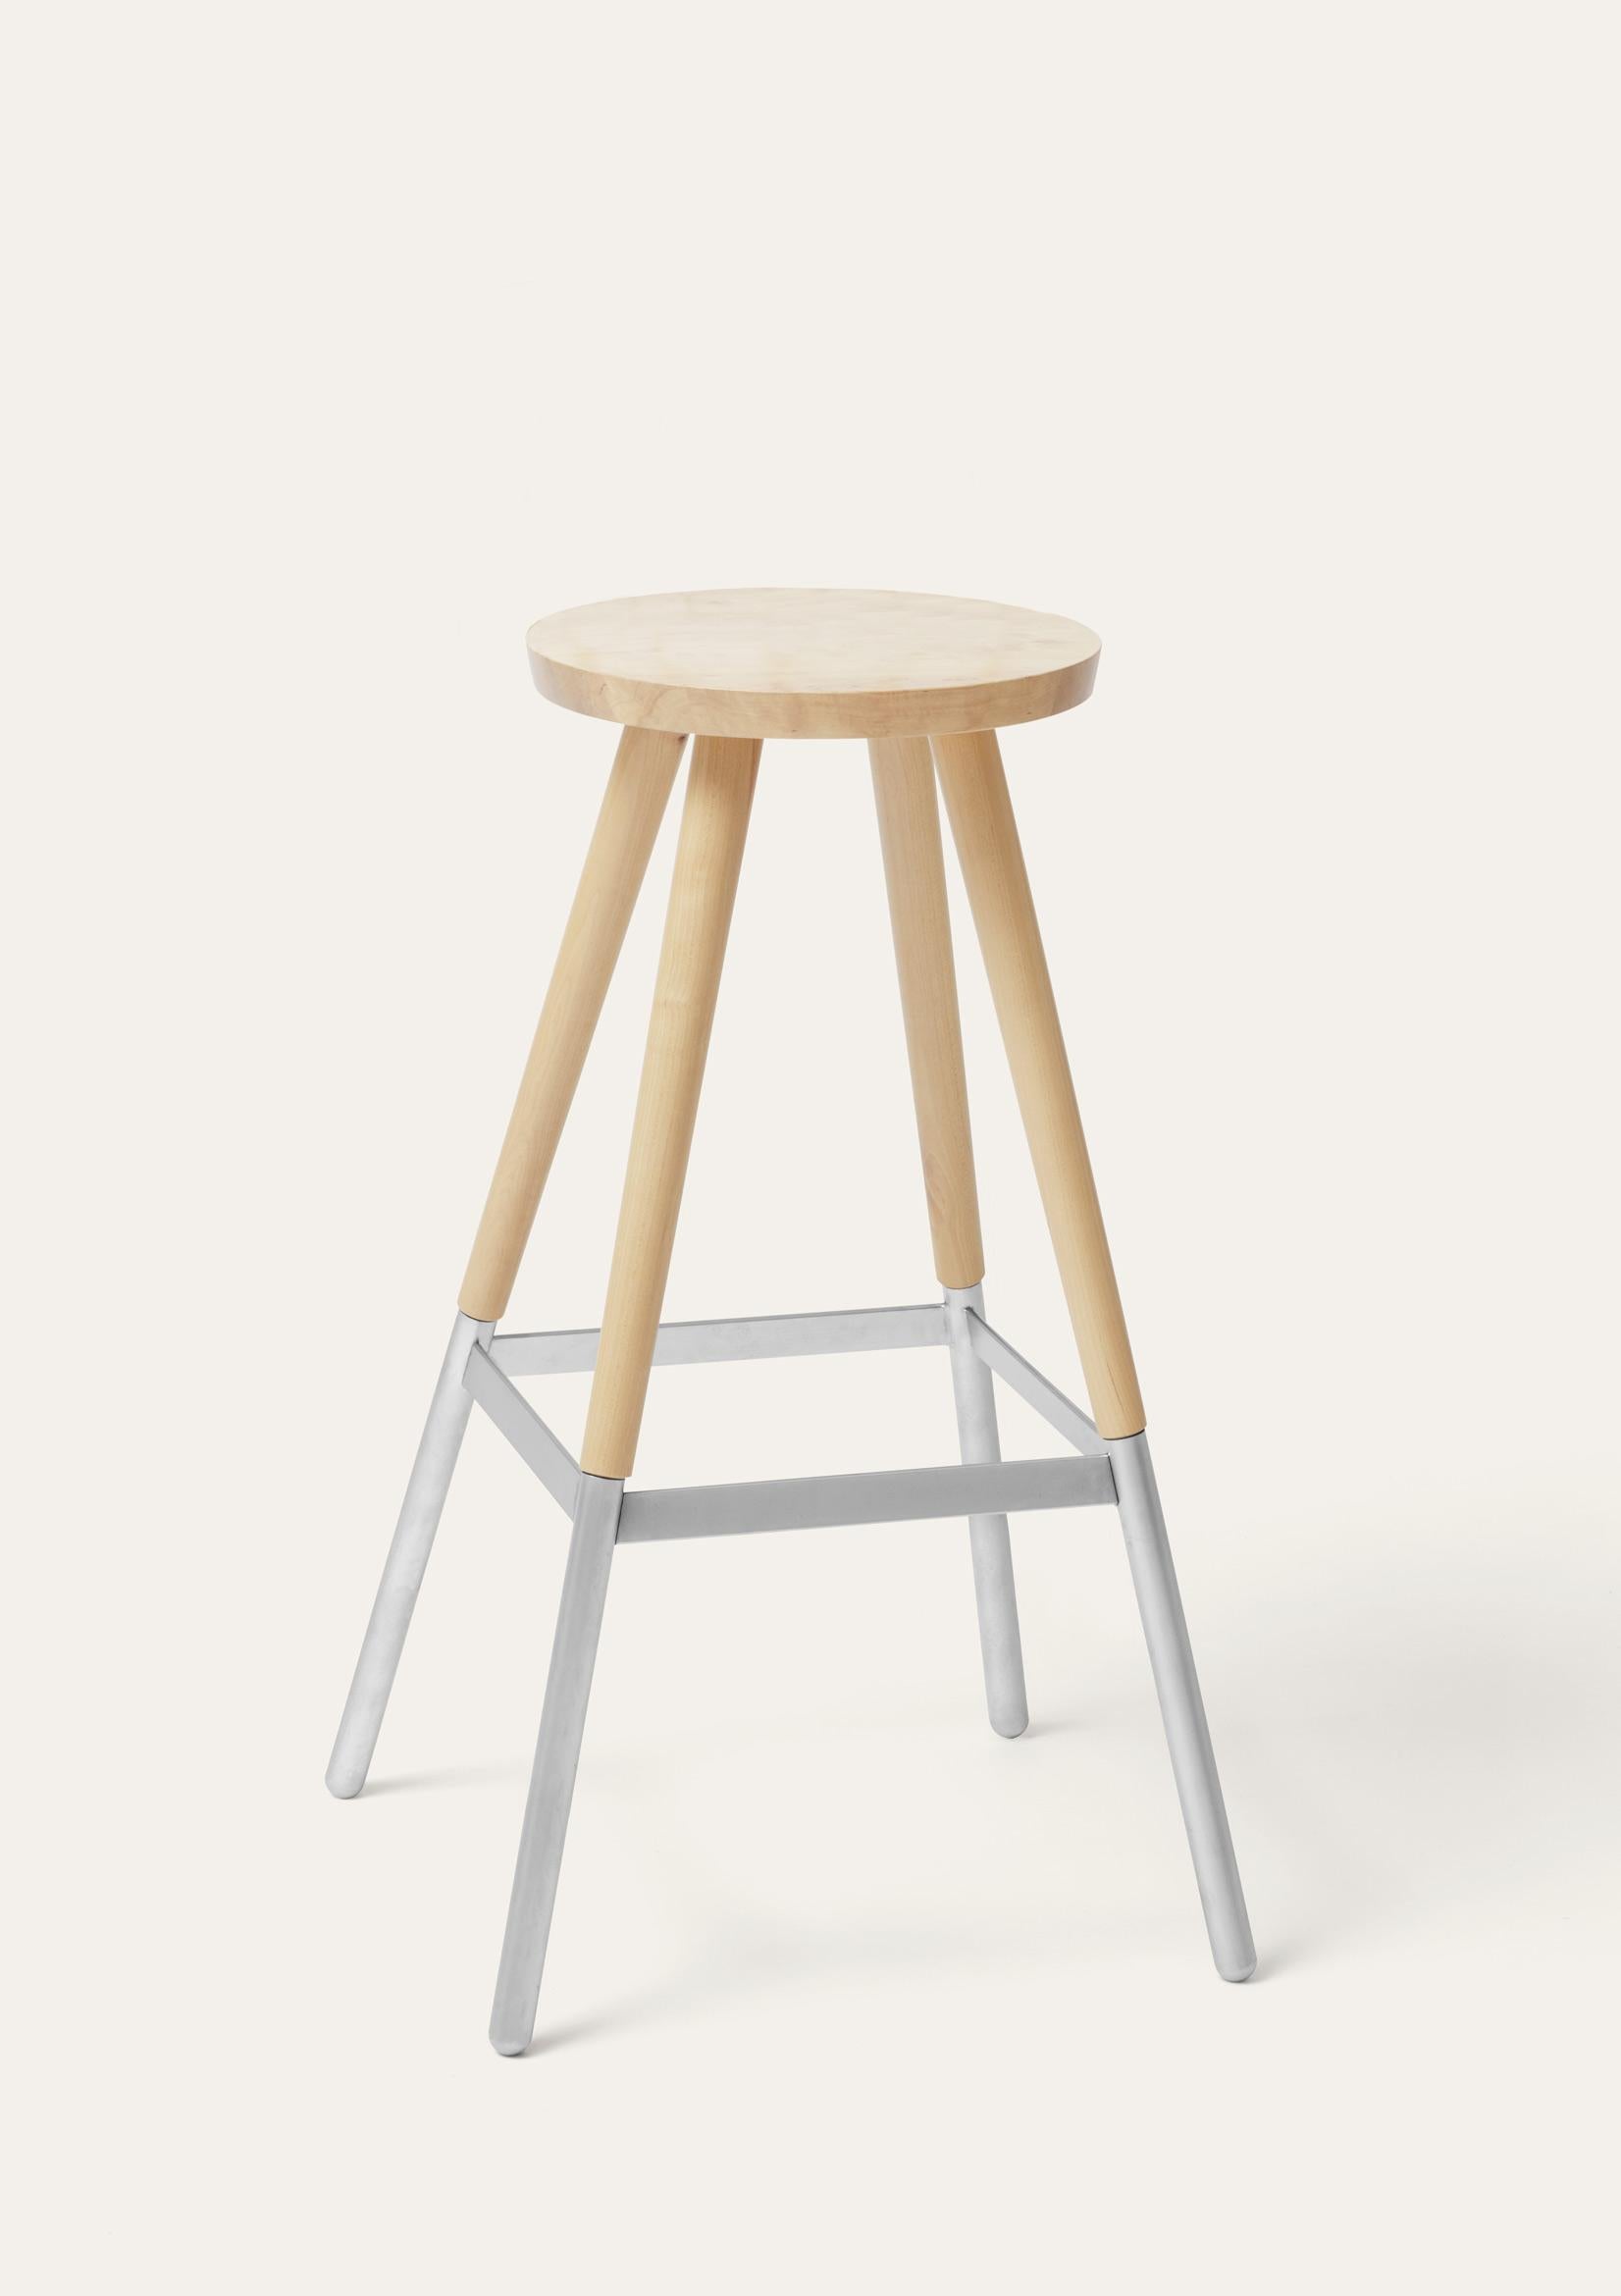 Large Natural Tupp stool by Storängen Design
Dimensions: D 45 x W 45 x H 82 cm
Materials: birch wood, nickel plated steel.
Also available in other colors and with backrest.

Give the bar some character! Tupp is avaliable in two heights, both